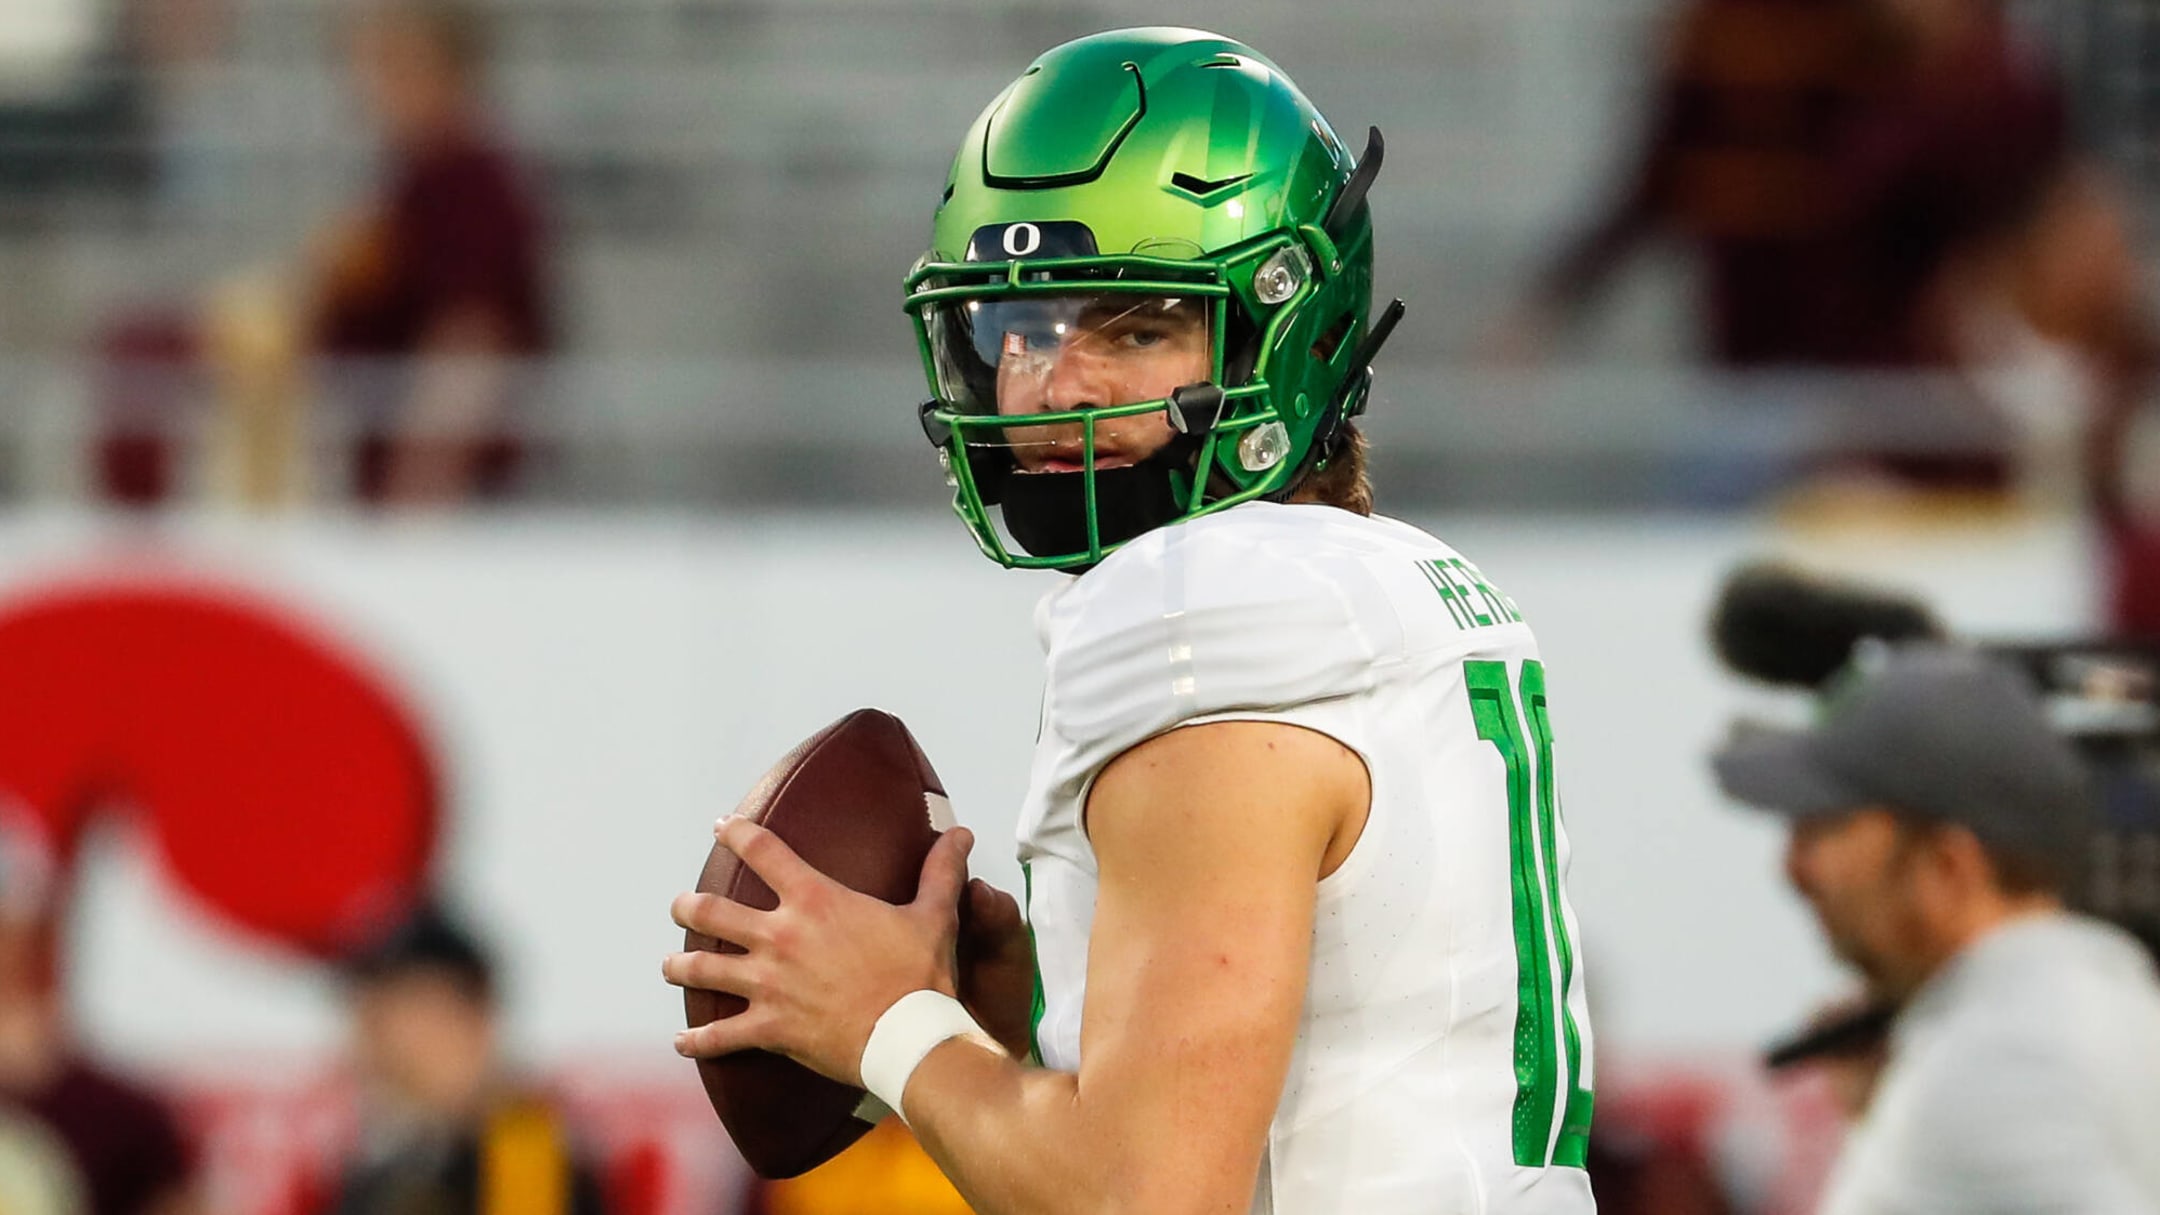 Best of the West College Football Top 25: Oregon Ducks make